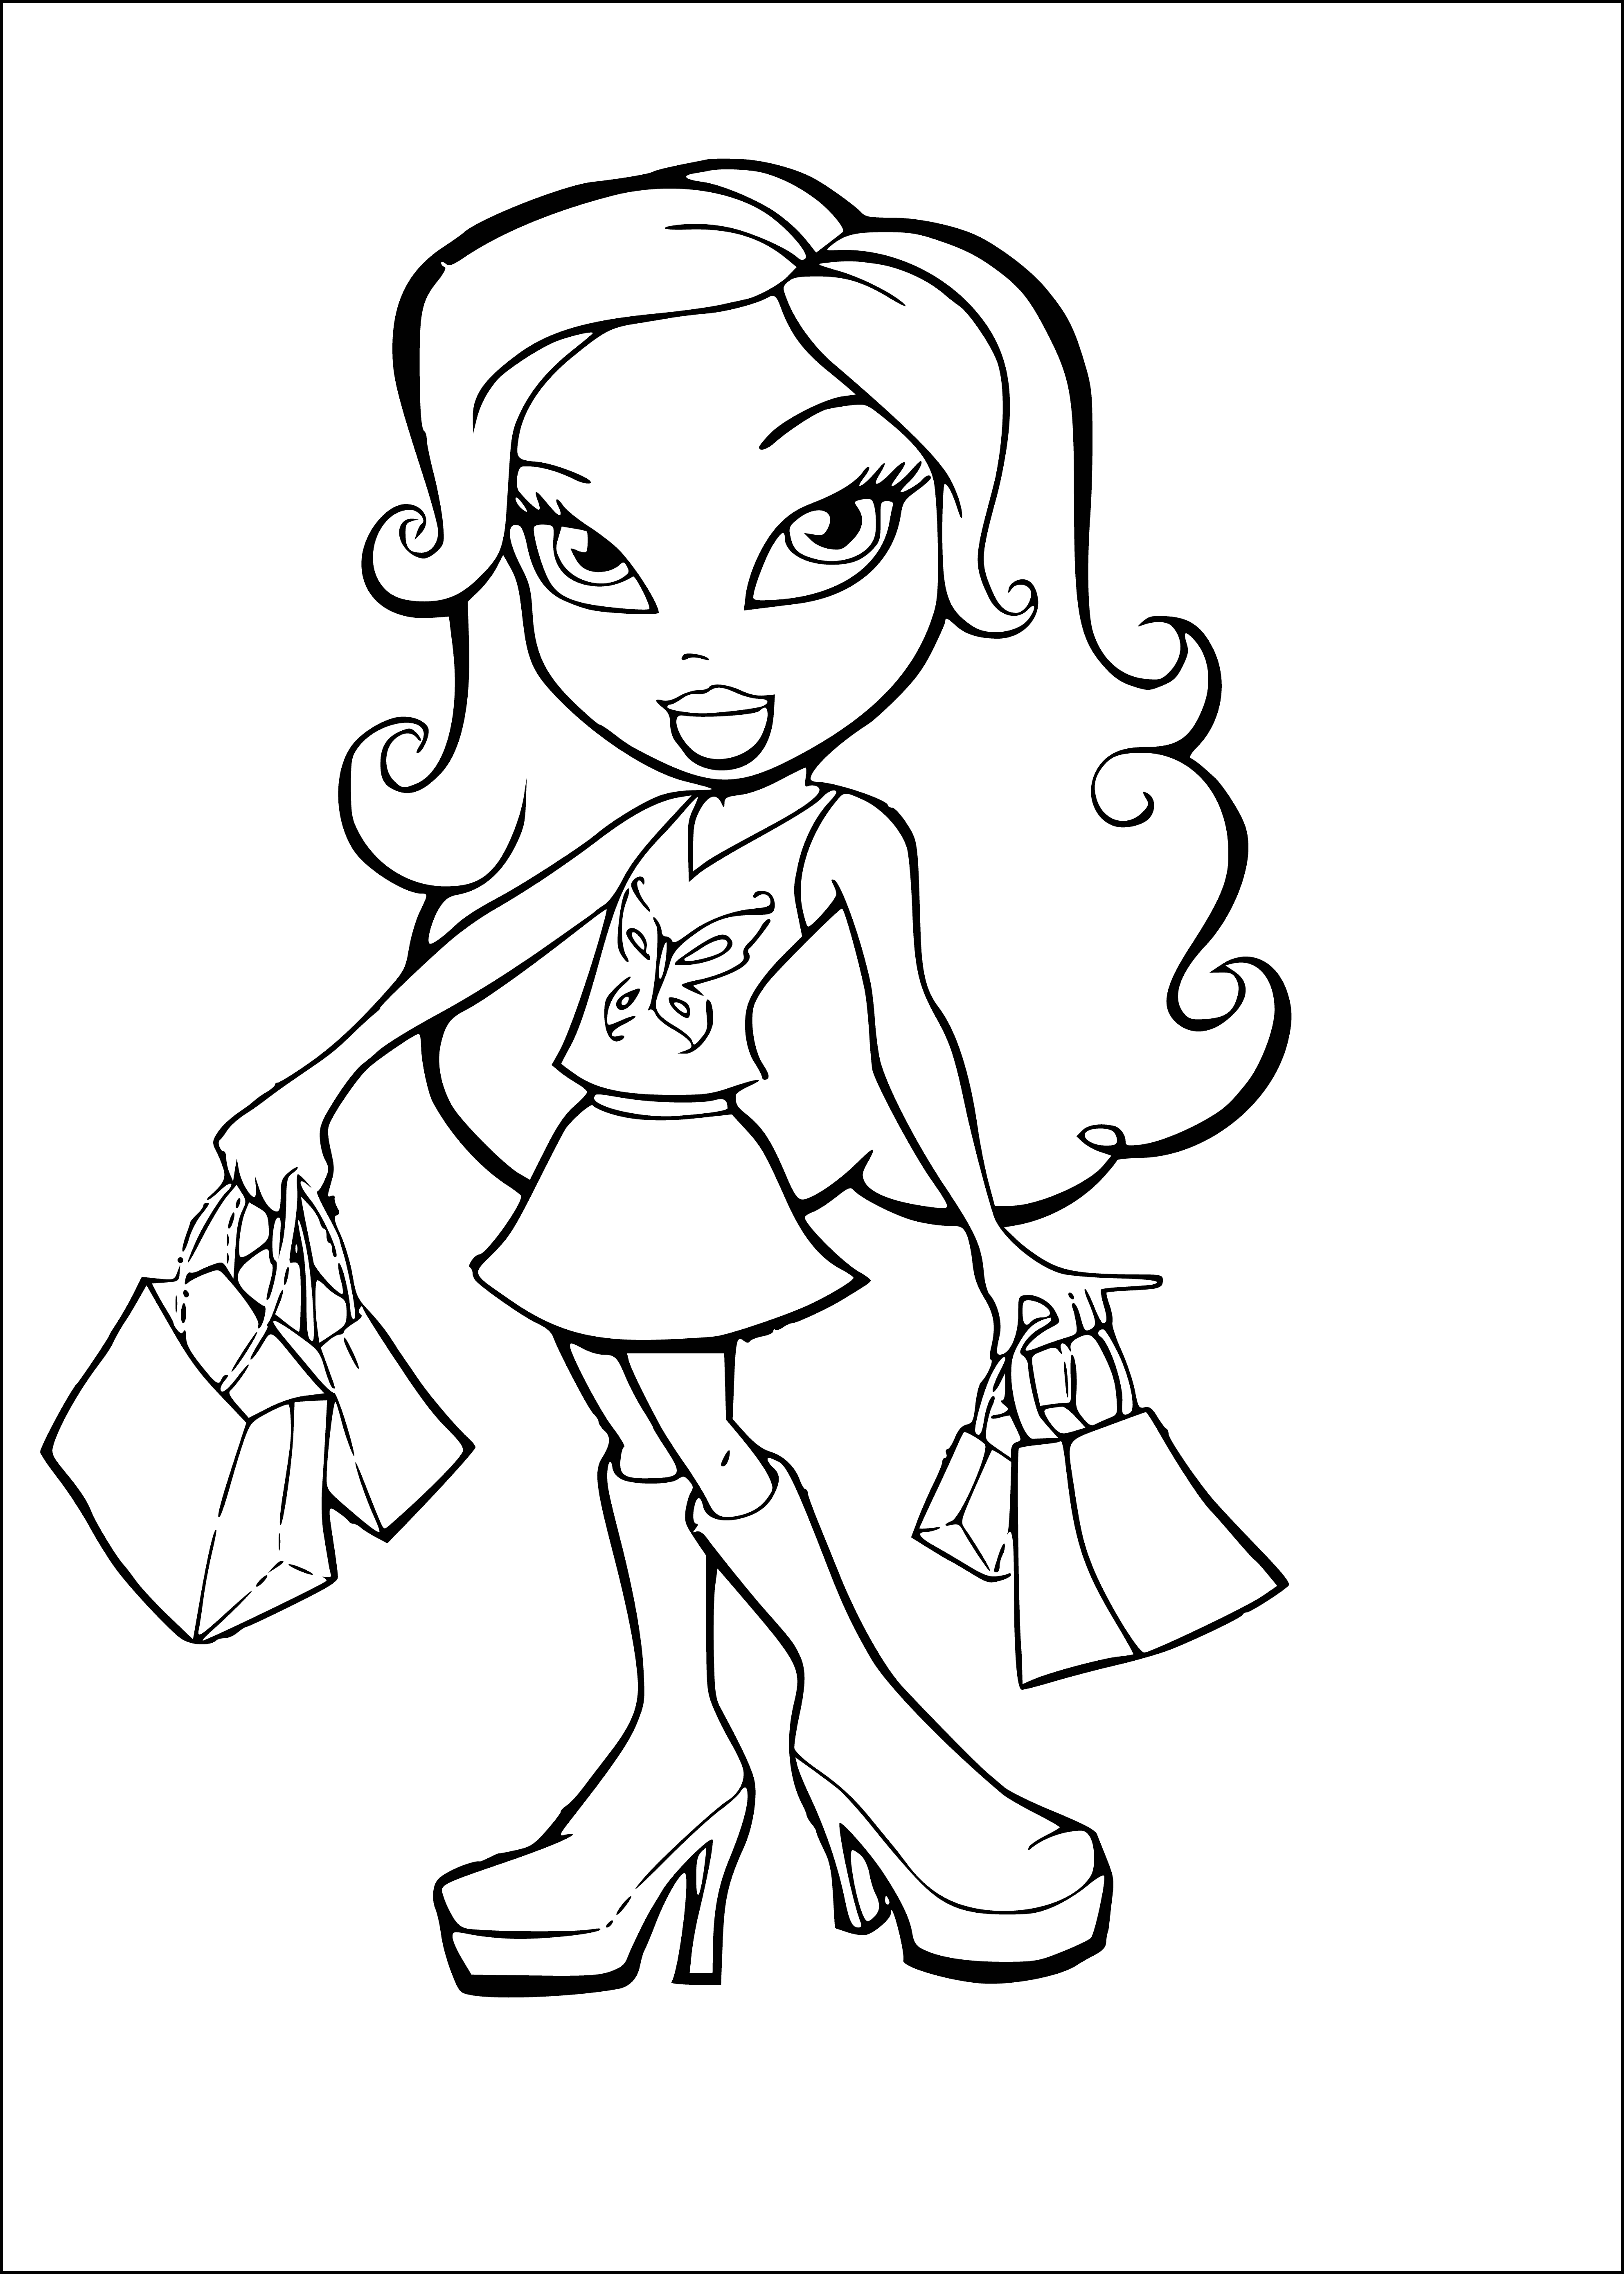 coloring page: The Bratz are four stylish friends who have fun together shopping, chatting, and more! #Yasmin #Cloe #Jade #Sasha